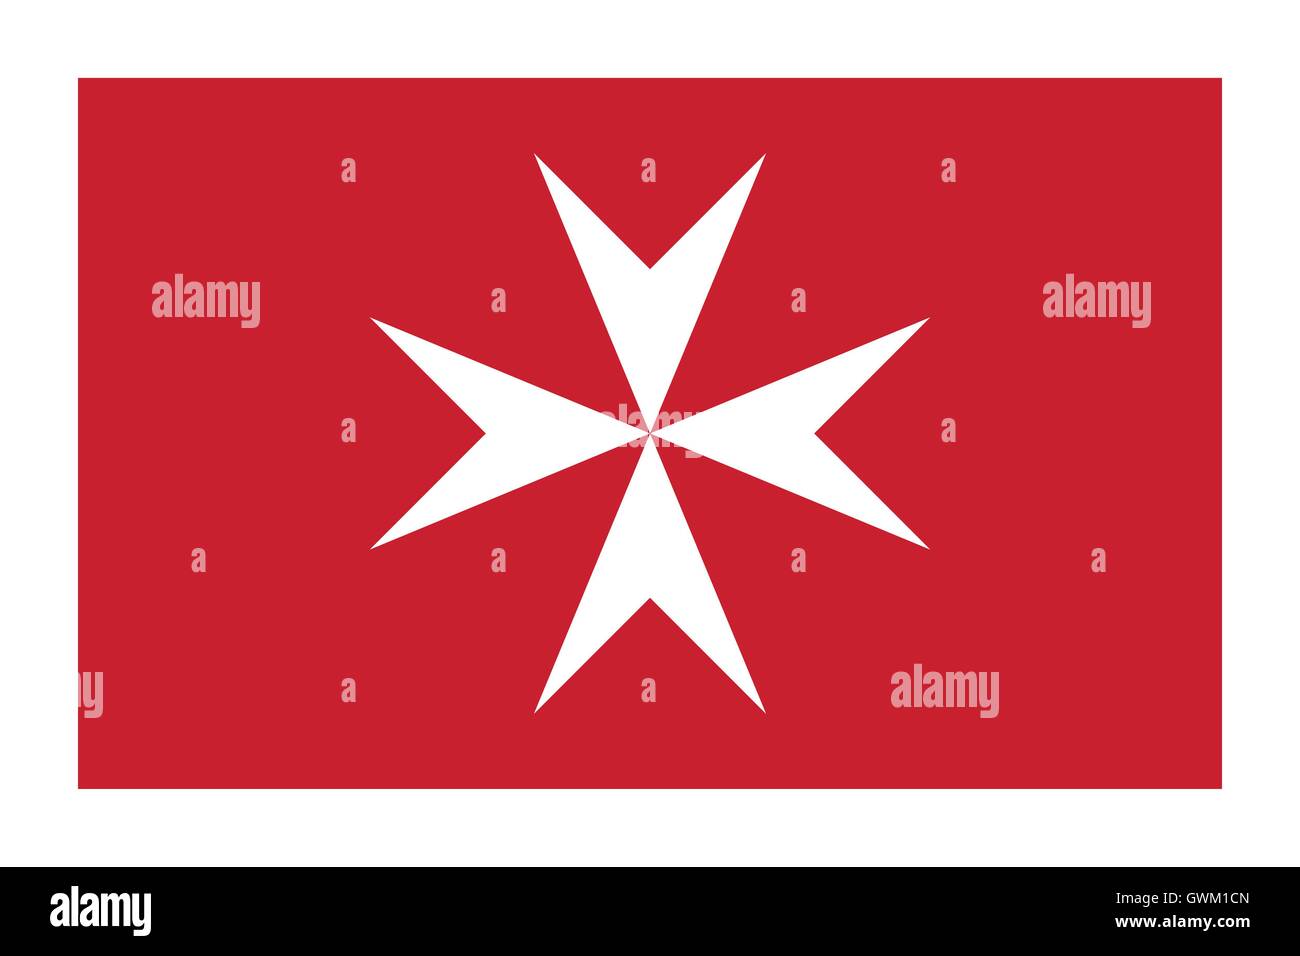 Malta flag civil variant, correct color and proportion, accurate vector illustration. Stock Vector